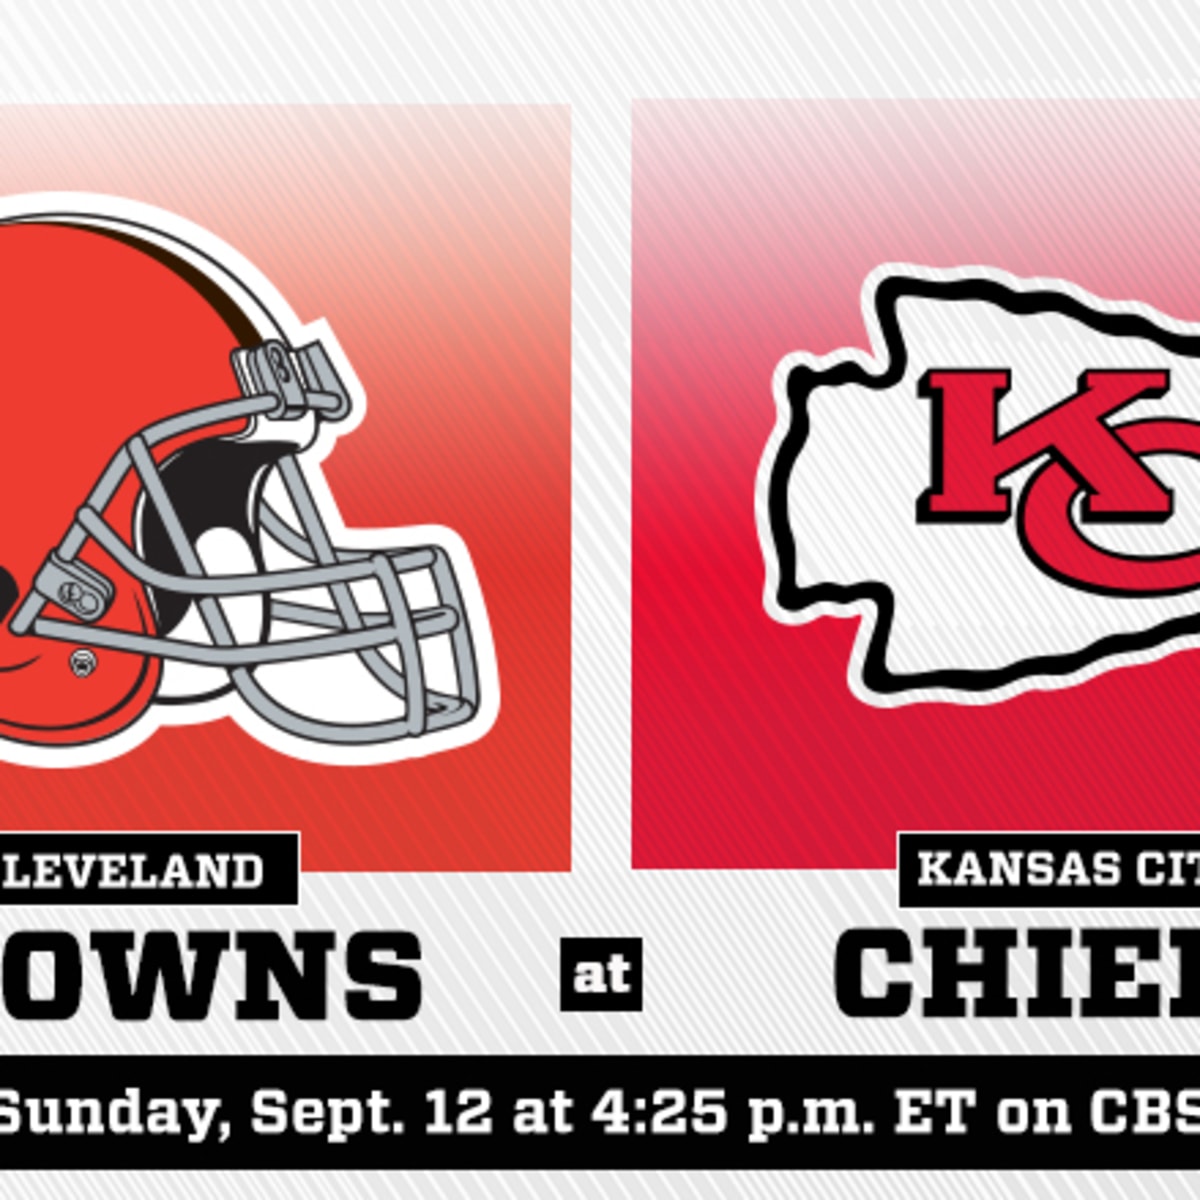 How to watch Kansas City Chiefs vs Cleveland Browns for free in